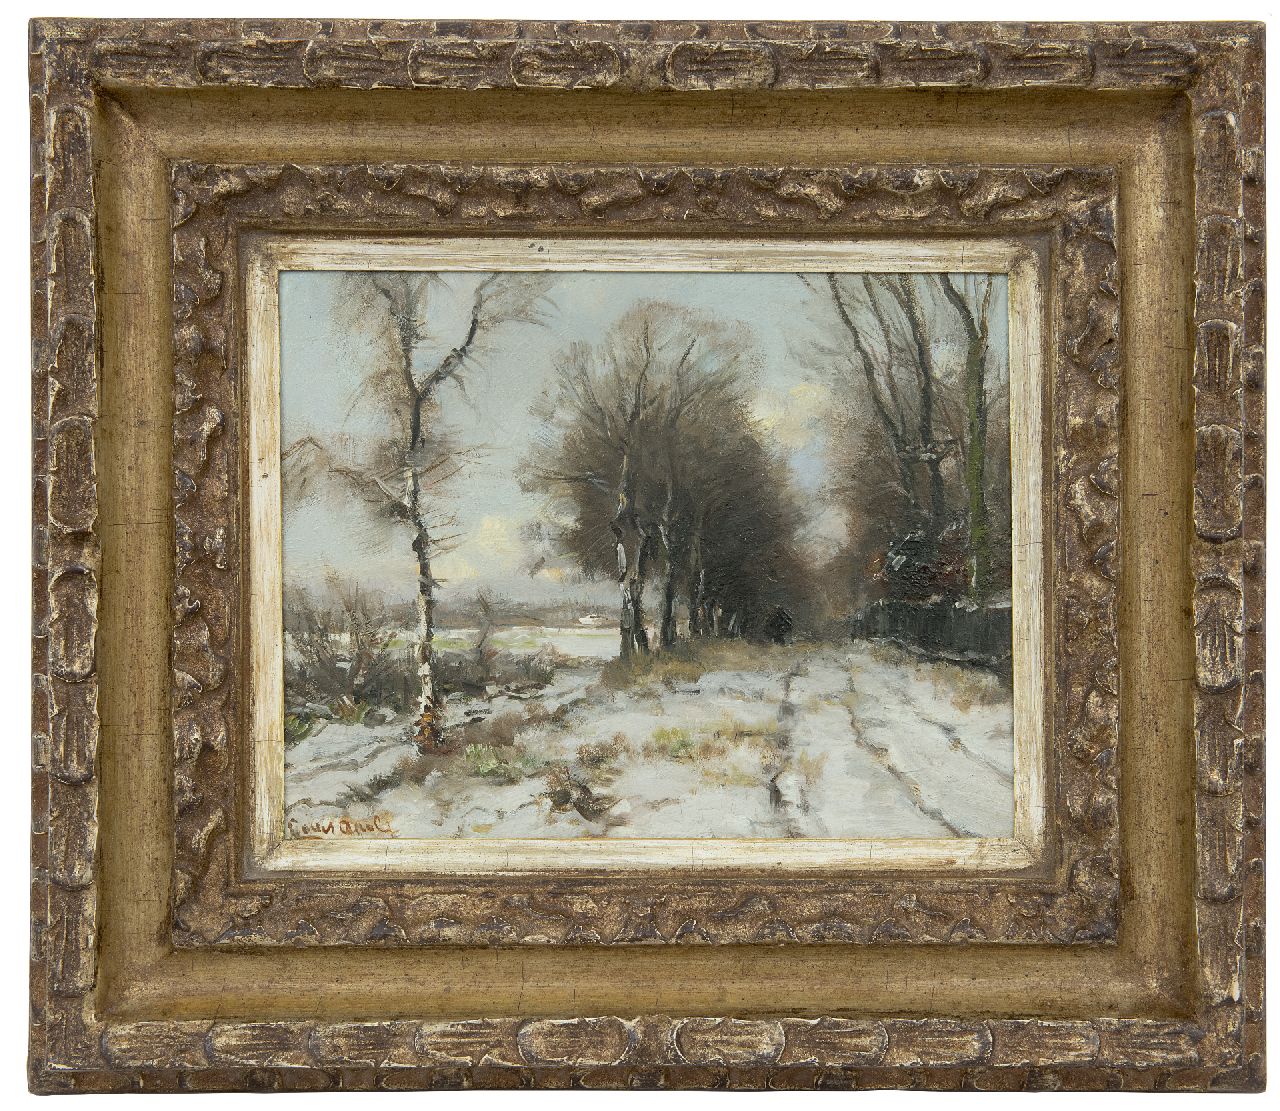 Apol L.F.H.  | Lodewijk Franciscus Hendrik 'Louis' Apol, Wood gatherer on a snowy path, oil on panel 21.8 x 28.1 cm, signed l.l.